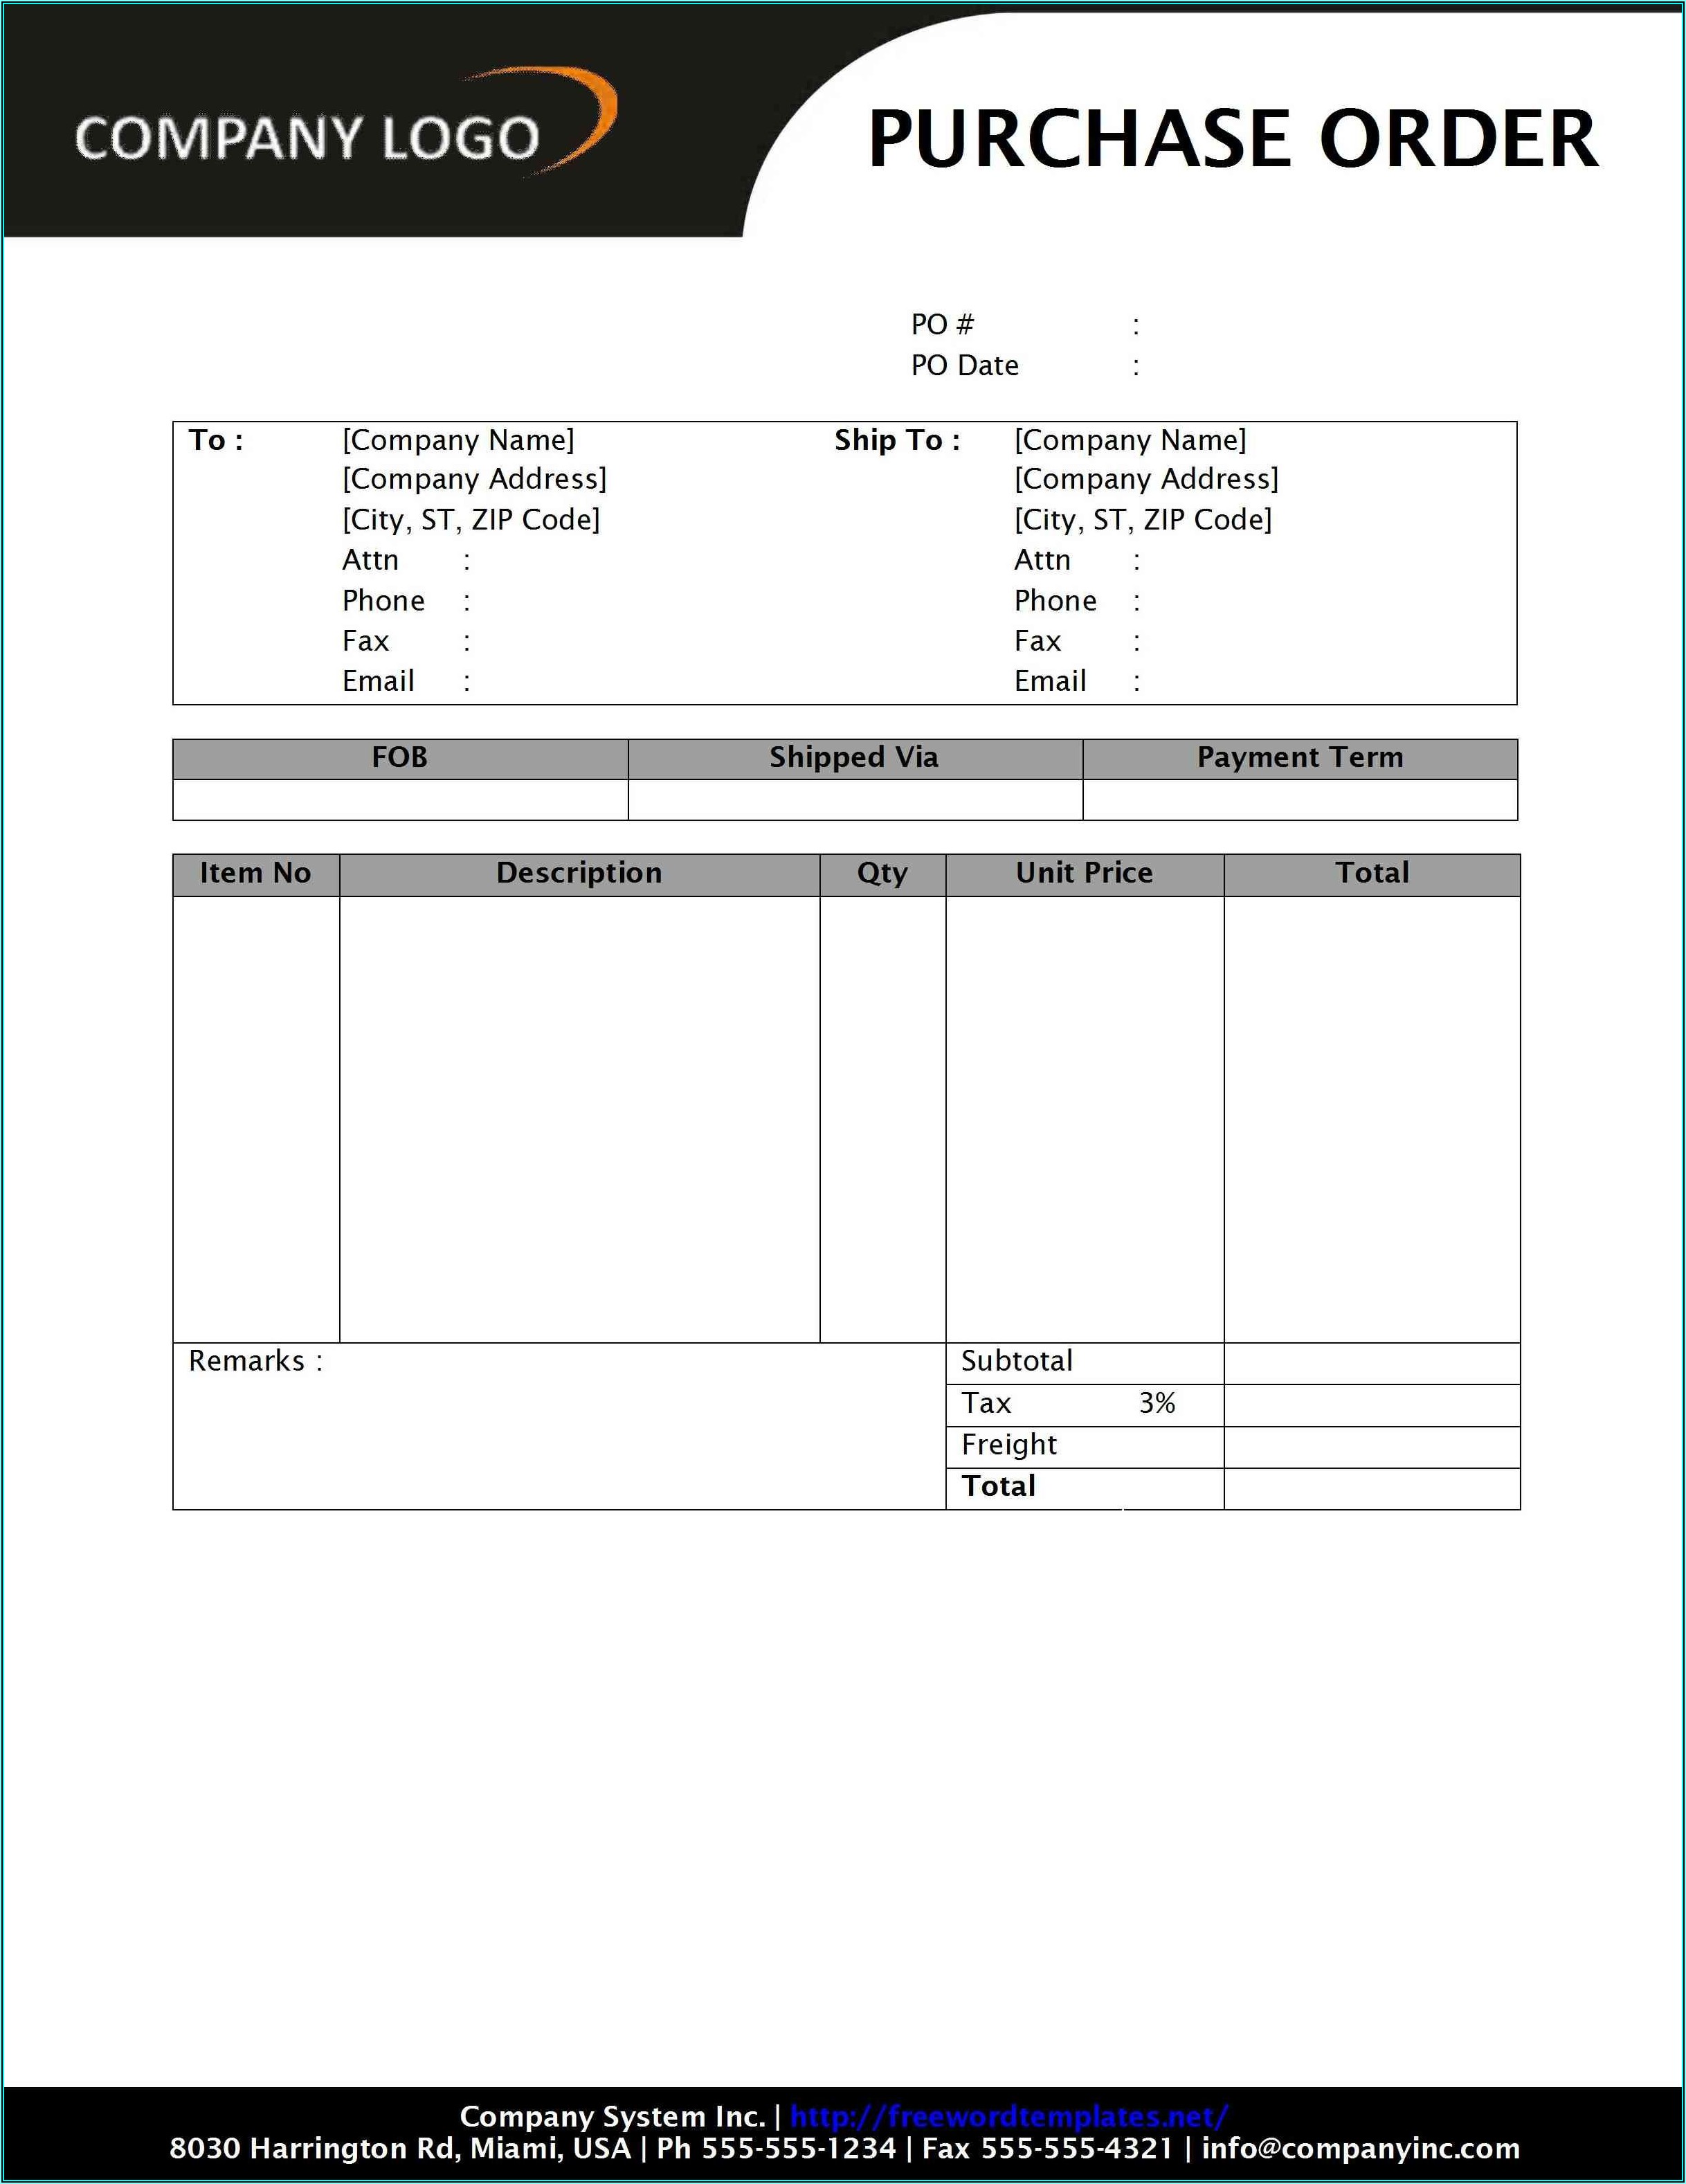 Purchase Order Form Excel